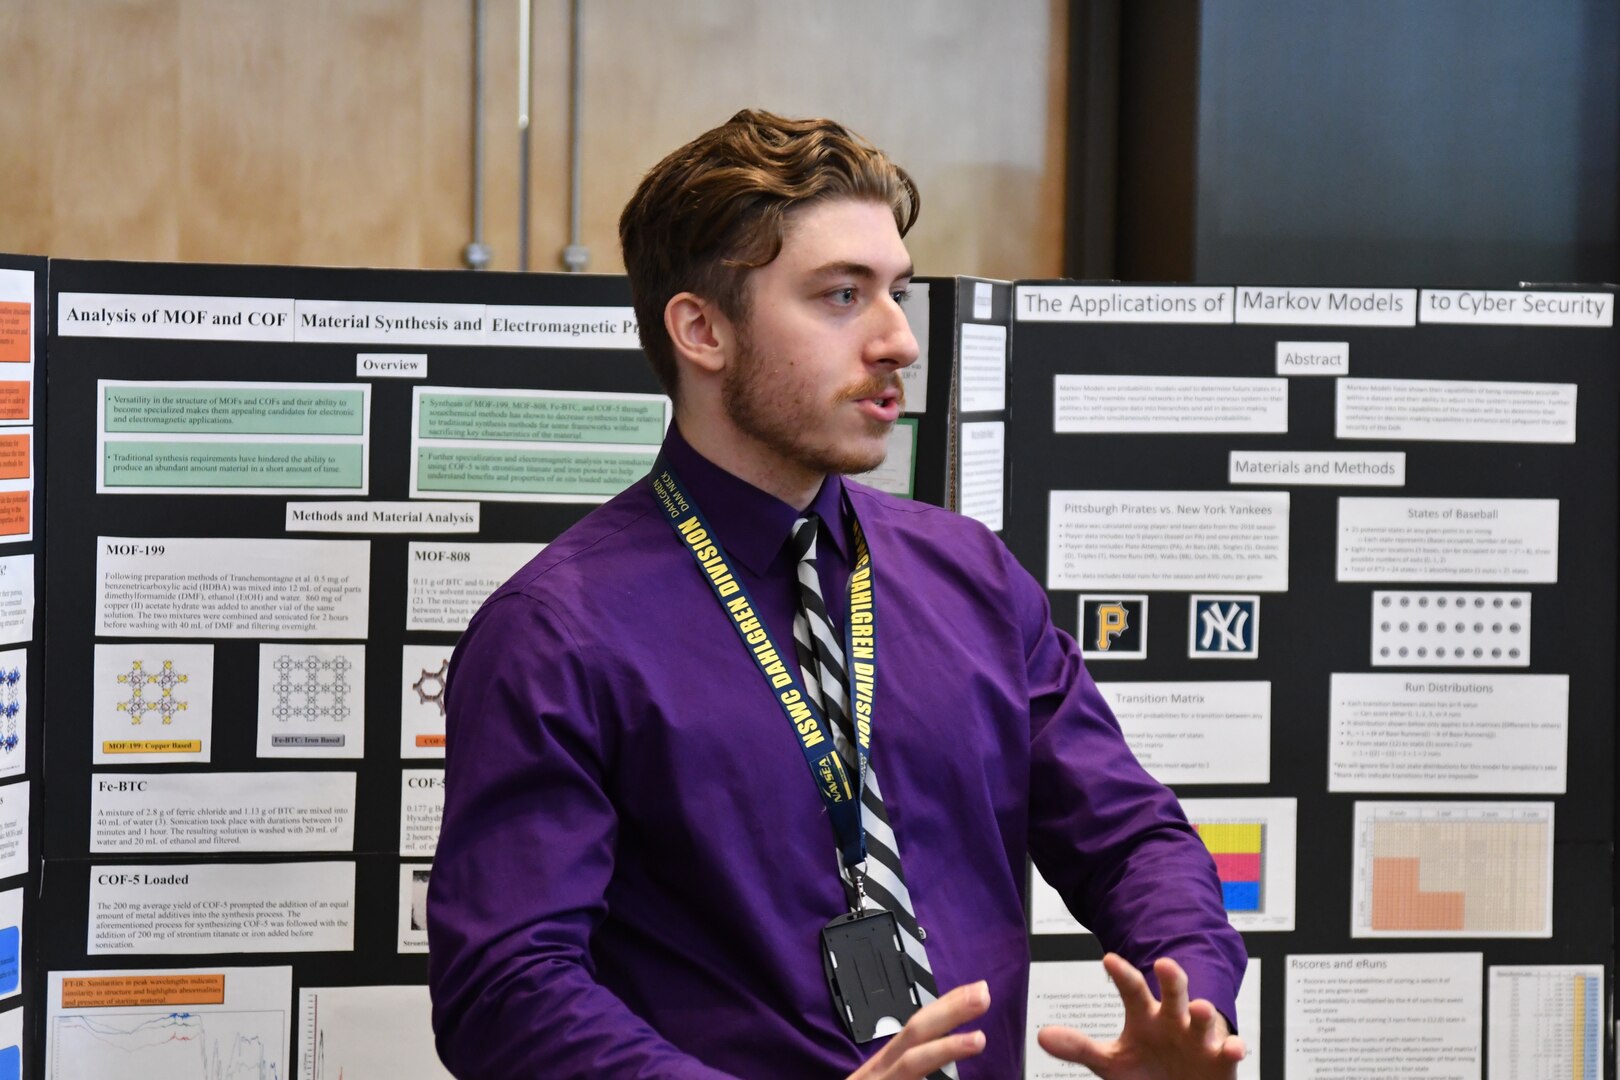 IMAGE: DAHLGREN, Va. (July 25, 2019) — A student briefs attendees on his technical project as his summer internship concluded at the Naval Surface Warfare Center Dahlgren Division. He was among 20 college students who completed their internships via the Naval Research Enterprise Internship Program (NREIP). The program encourages students to pursue science and engineering careers, furthers education via mentoring and their participation in research, and makes them aware of Navy research and technology efforts, which can lead to civilian employment within the Navy.